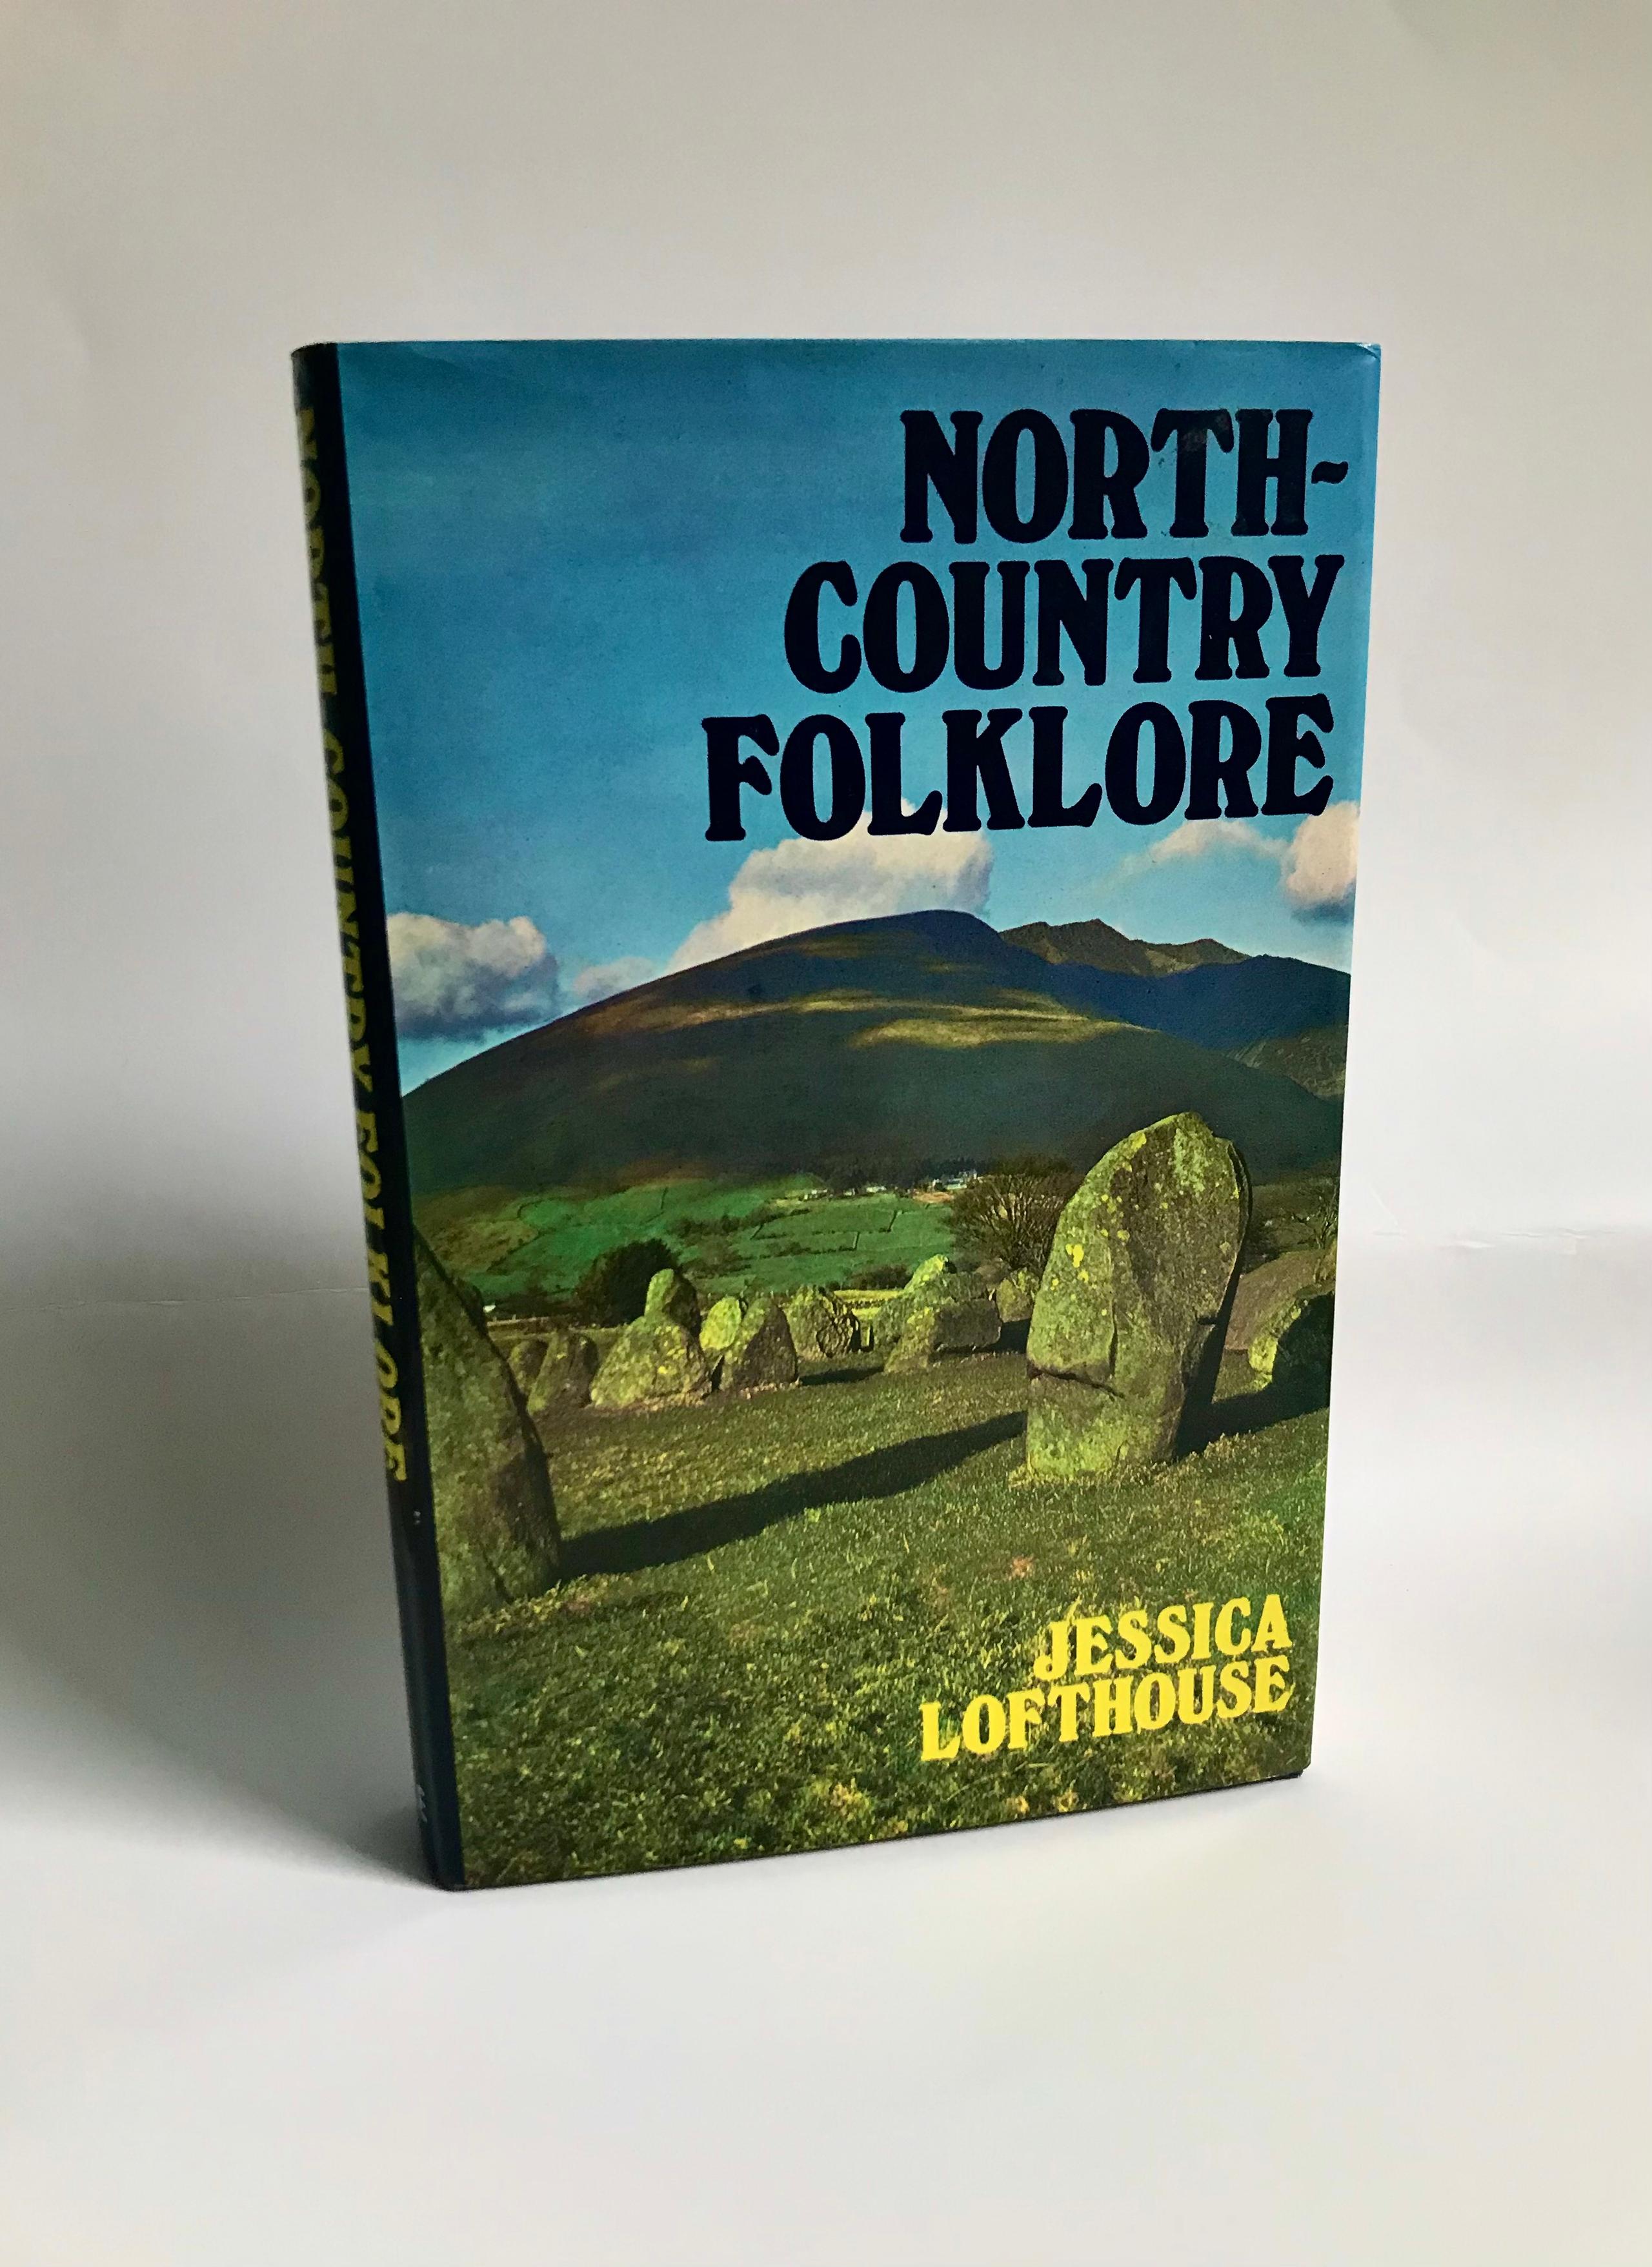 North-Country Folklore by Jessica Lofthouse